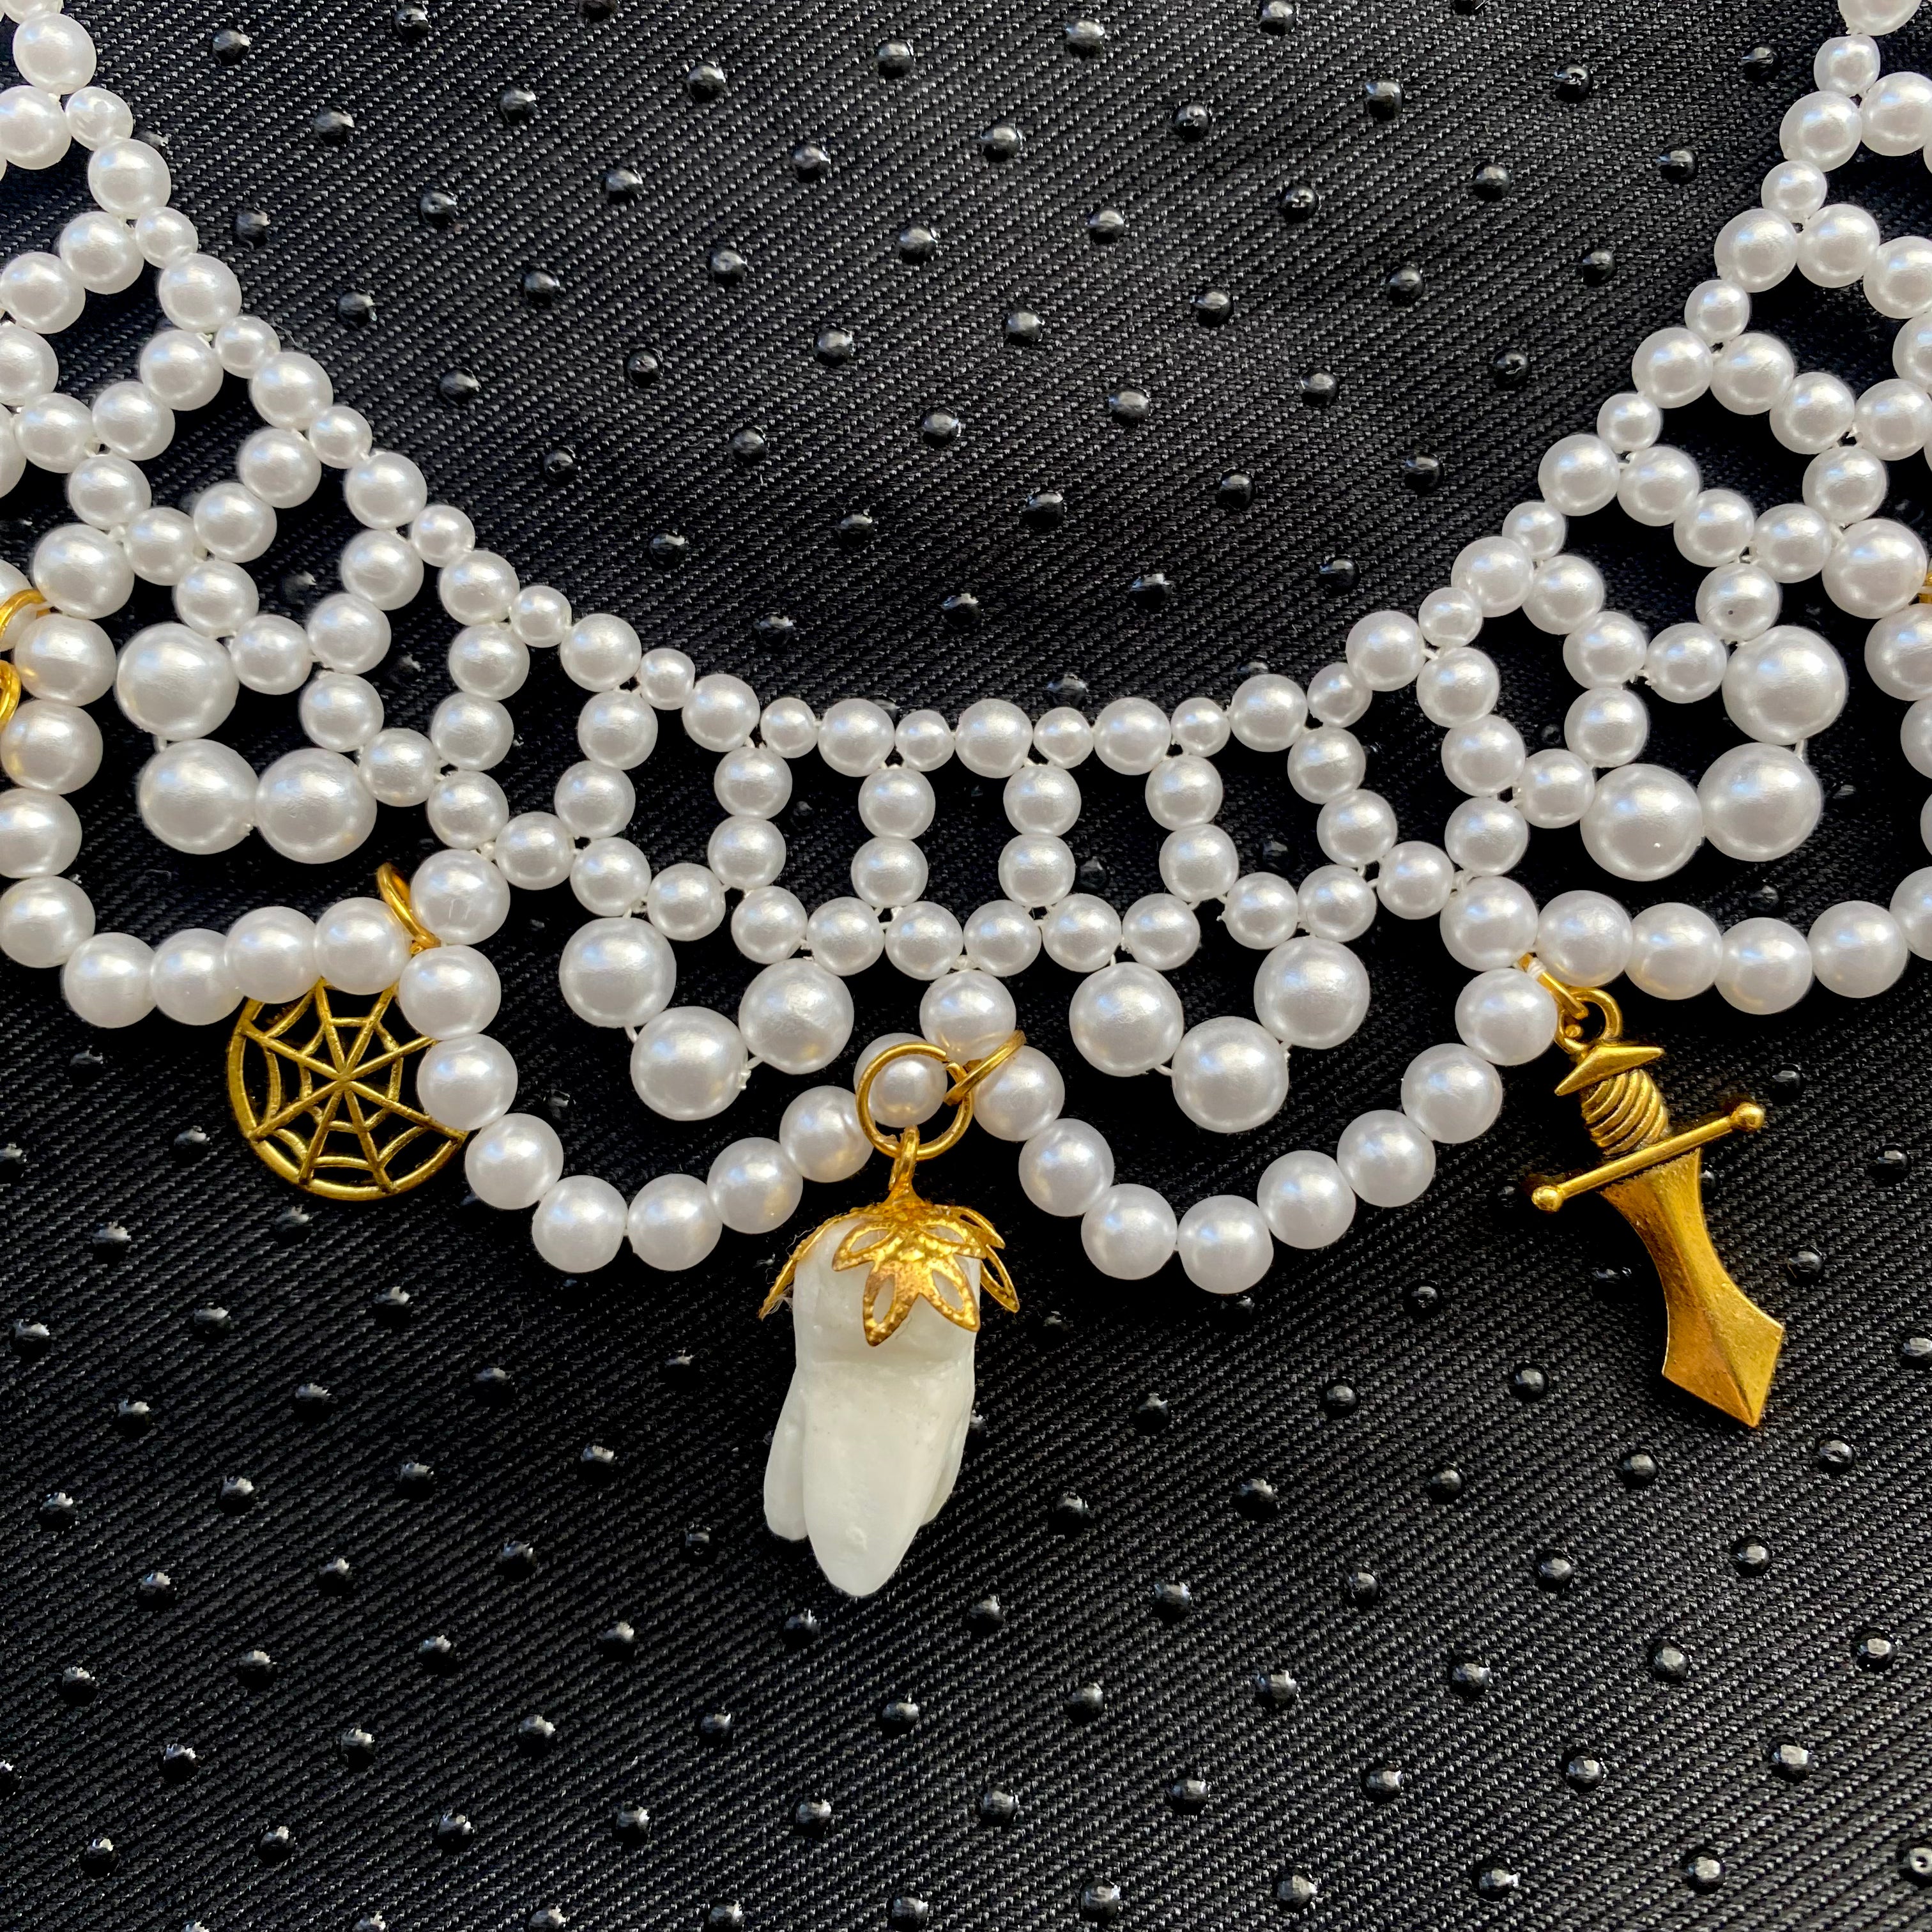 Pearl Necklace With Charms and Teeth